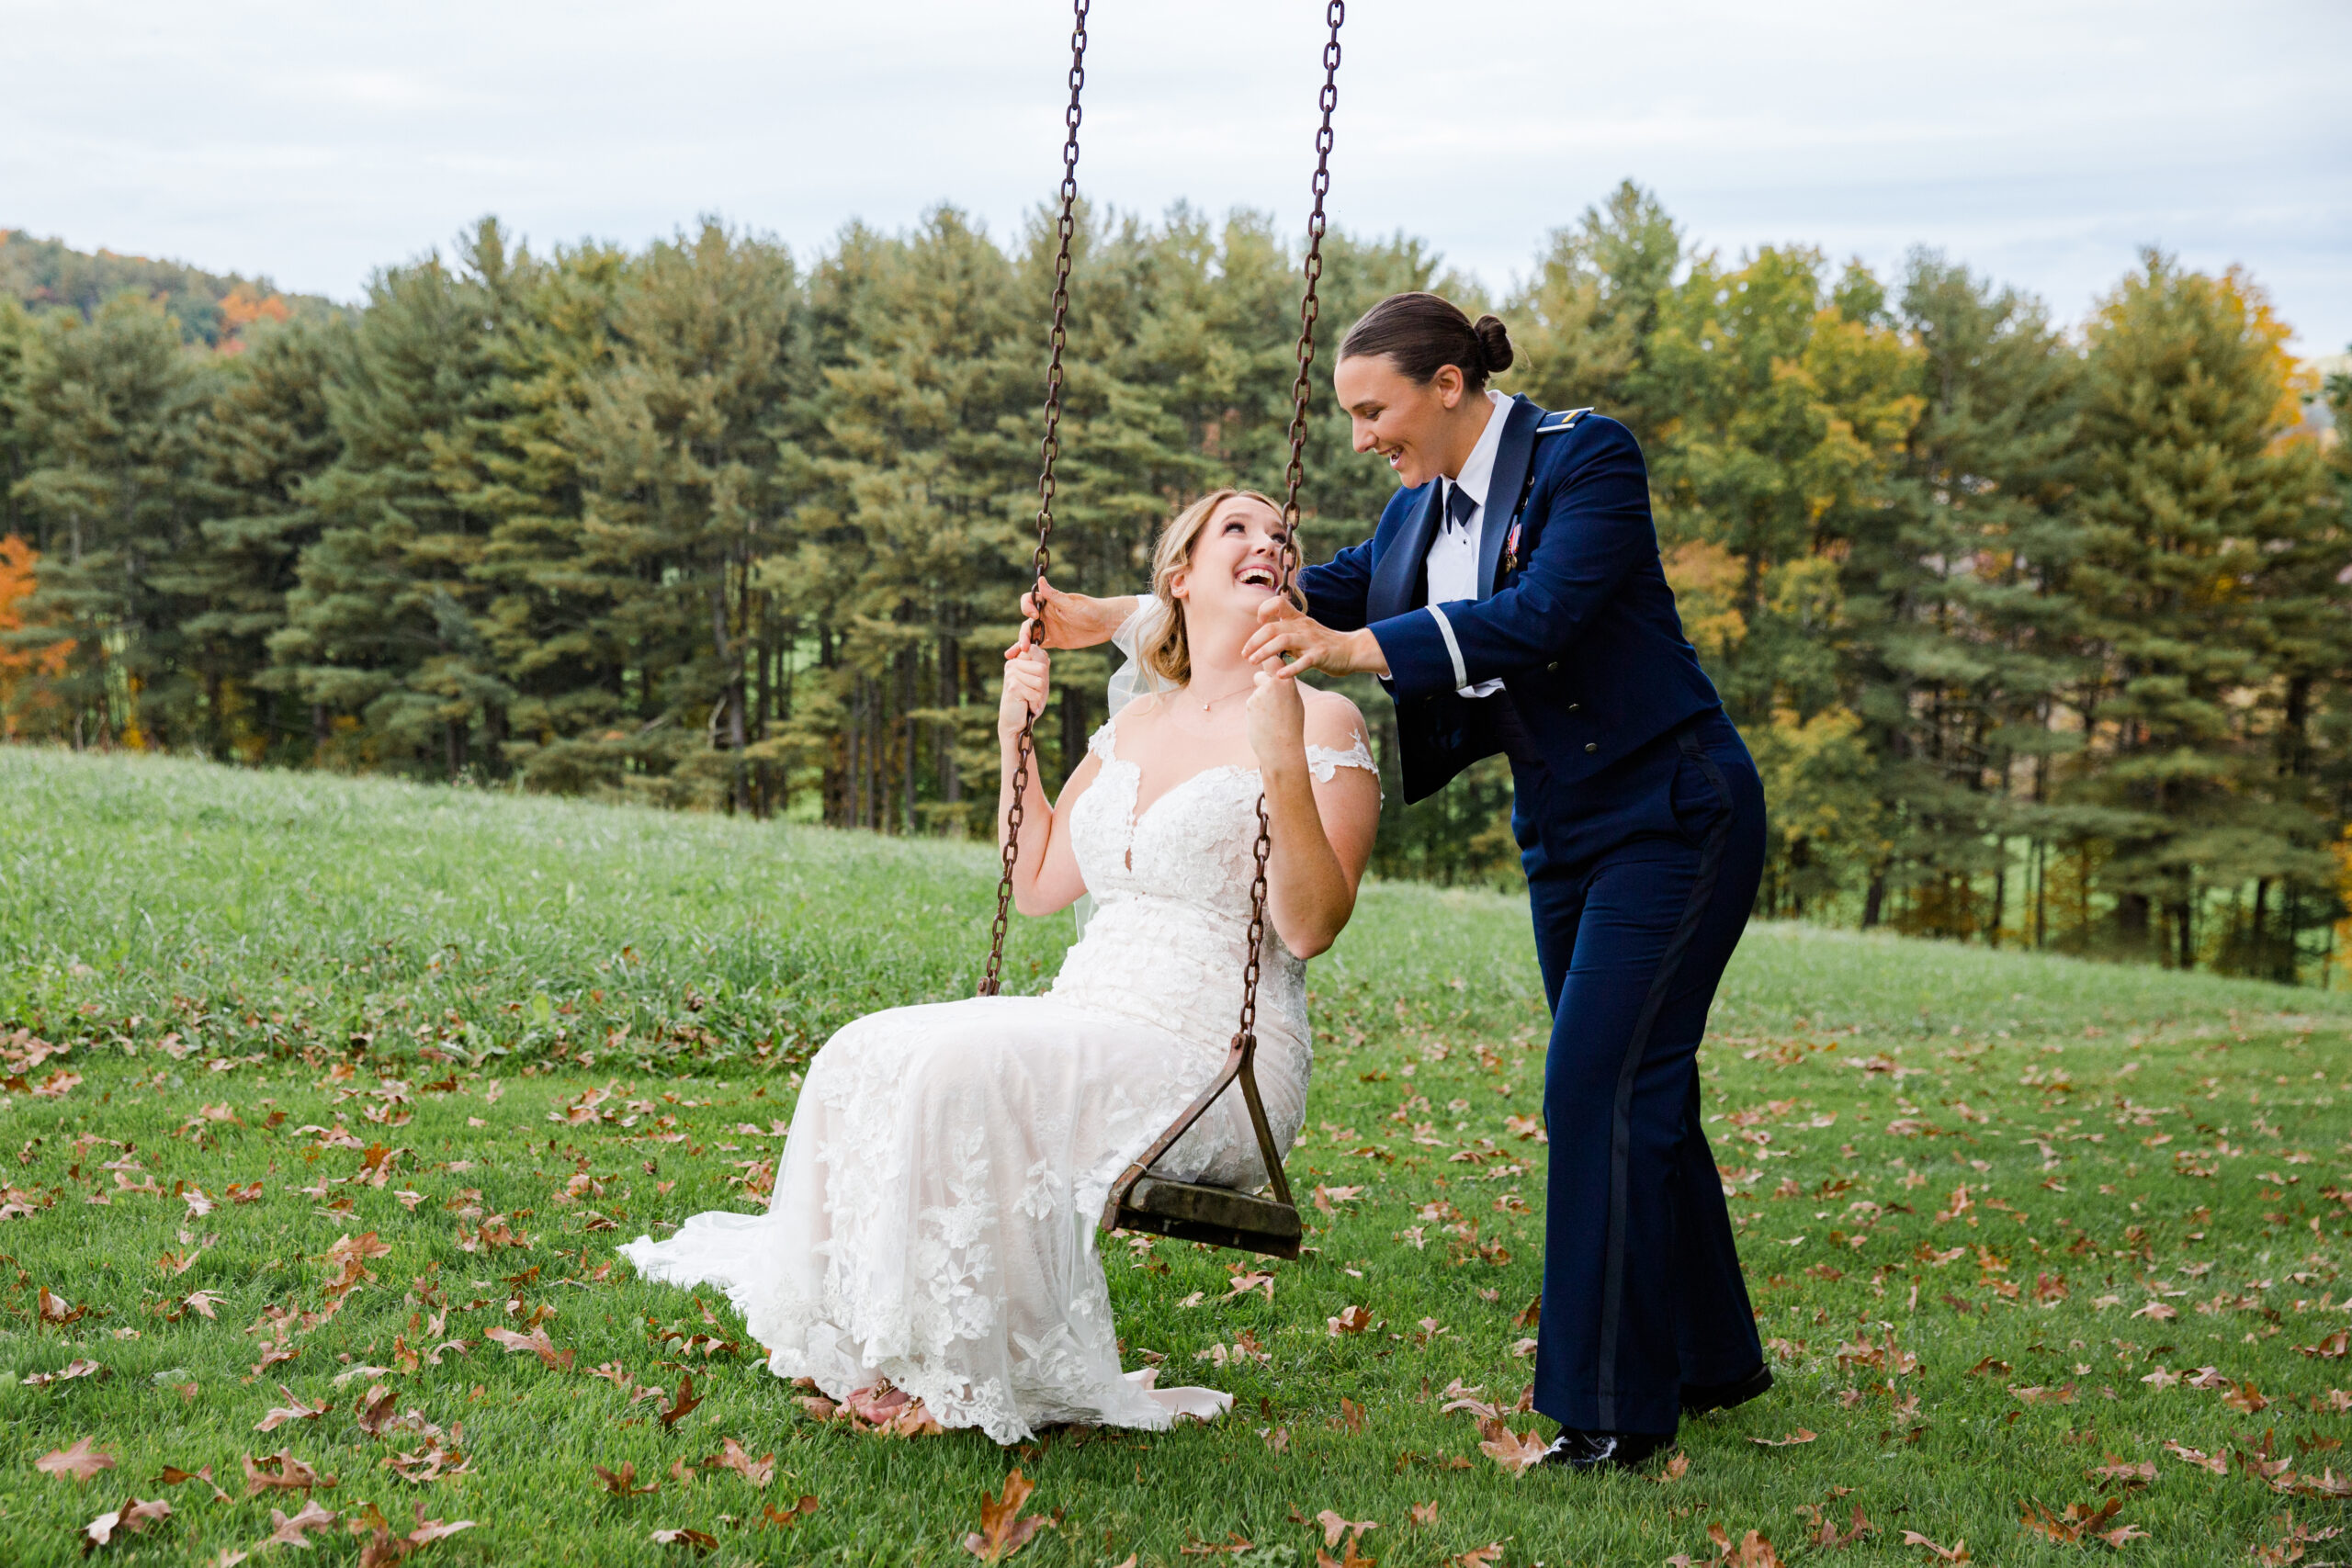 A Bride takes a ride on a swing at Zukas Hilltop Barn